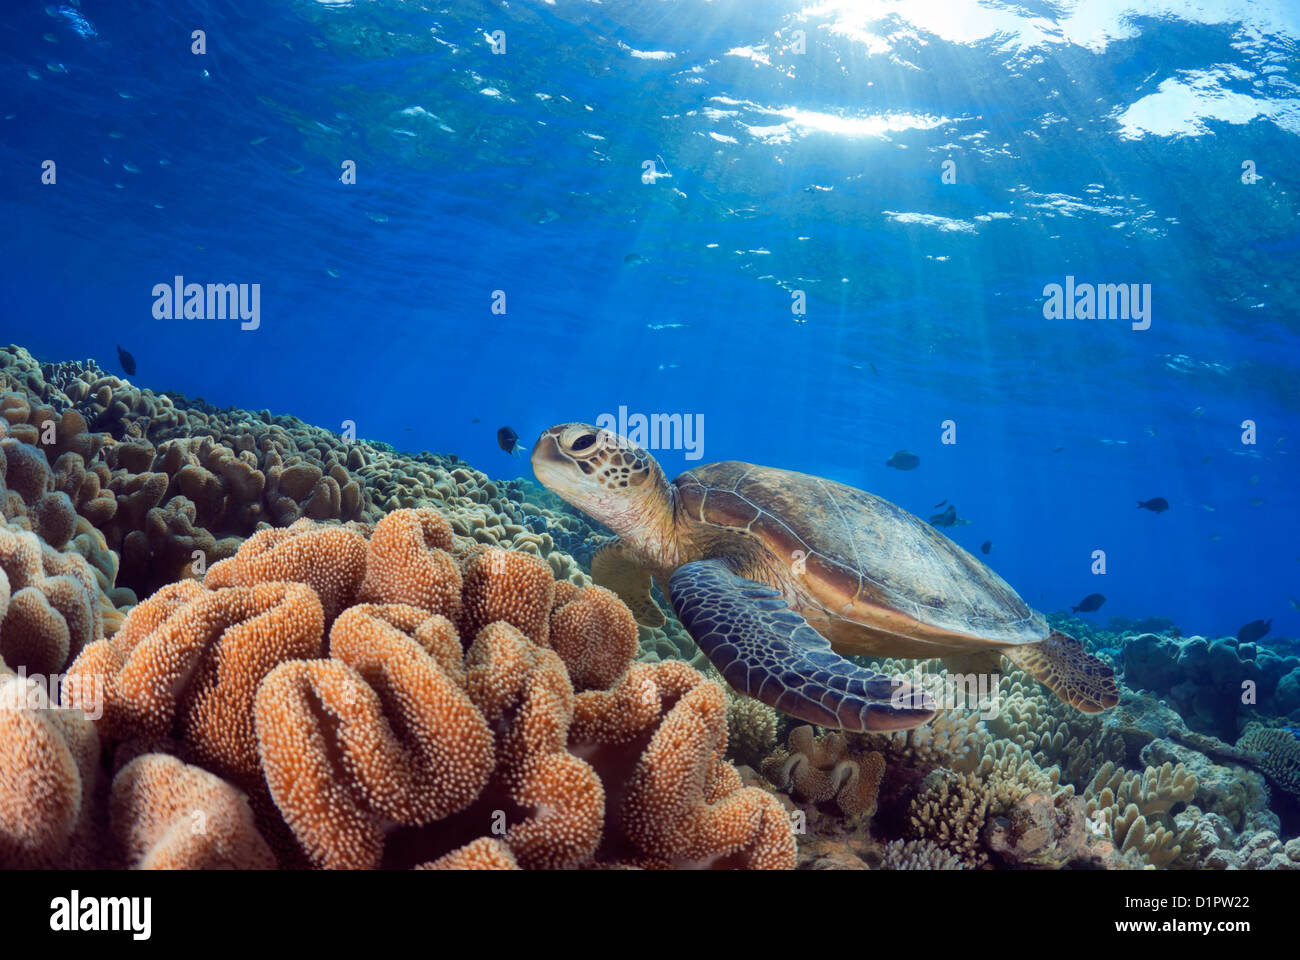 Green Sea Turtle Chelonia mydas swimming over a Coral Reef, Coral Sea, Great Barrier Reef, Pacific Ocean, Queensland Australia Stock Photo